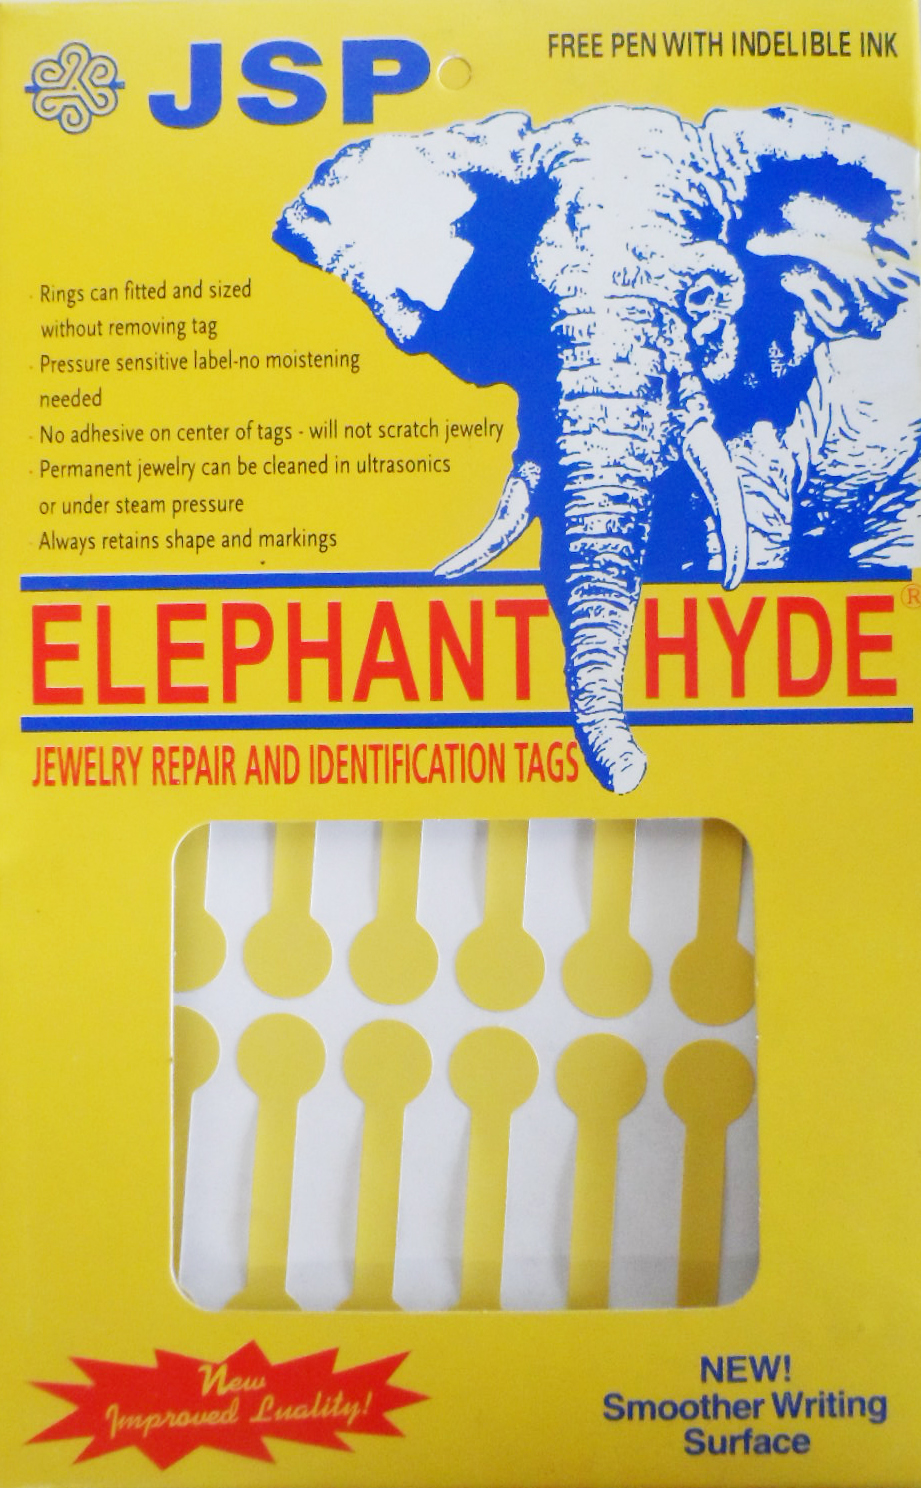 ELEPHANT HYDE TAGS GOLD LONG 500 PIECES